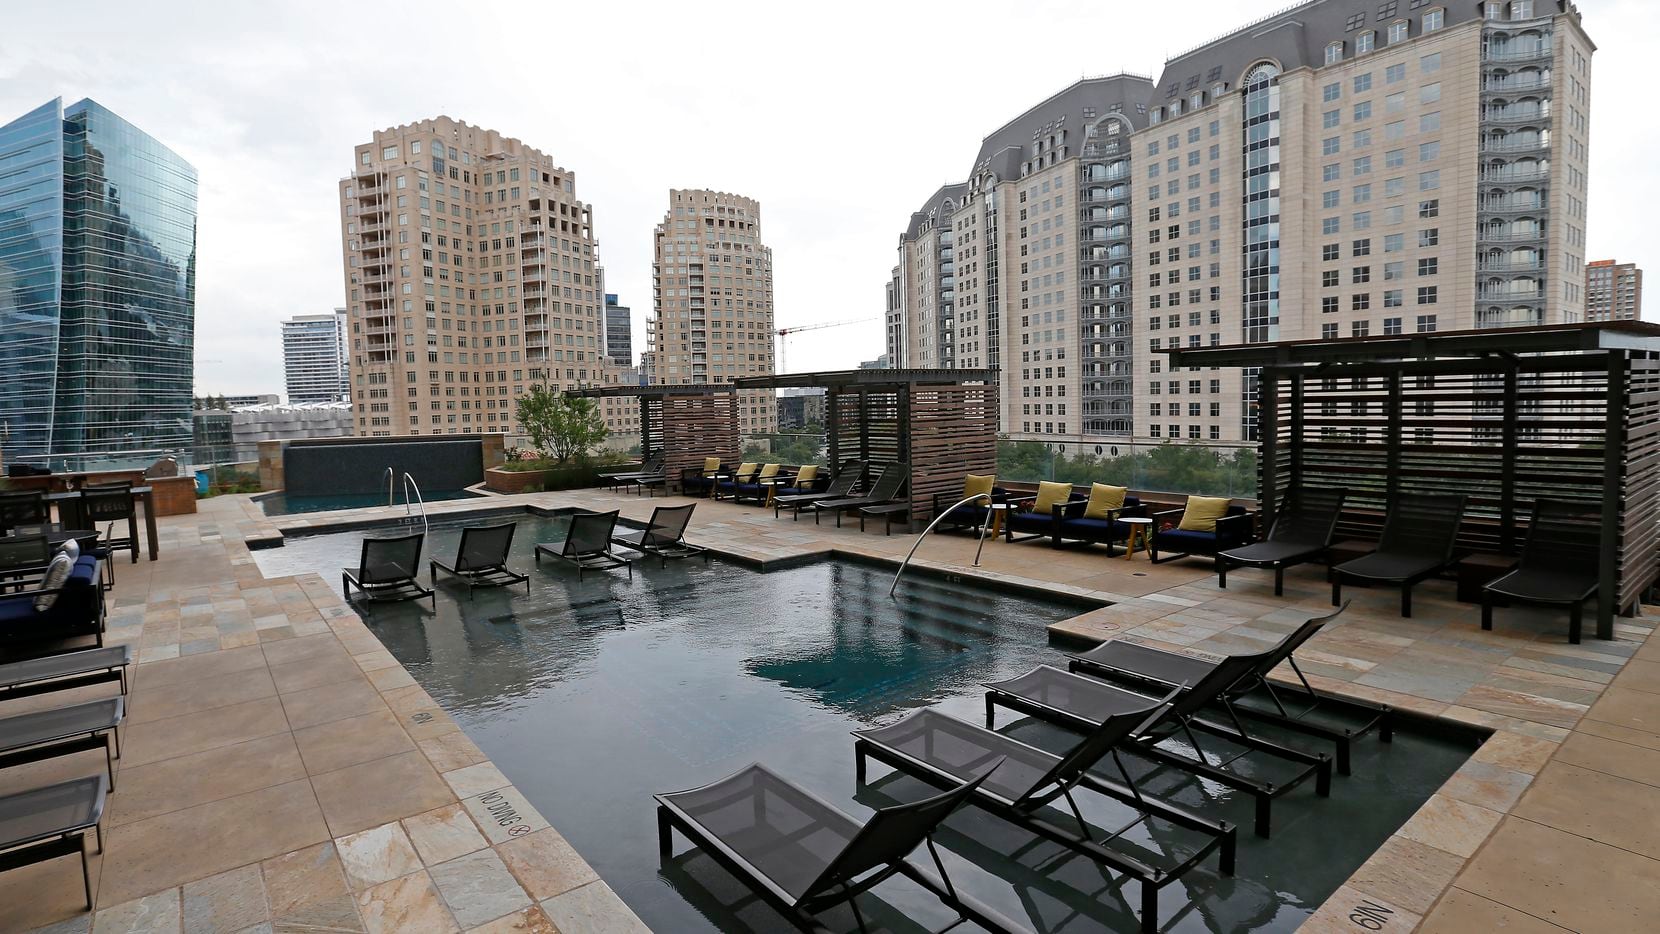 The number of high-end apartment renters in D-FW has risen more than 90 percent in the last...